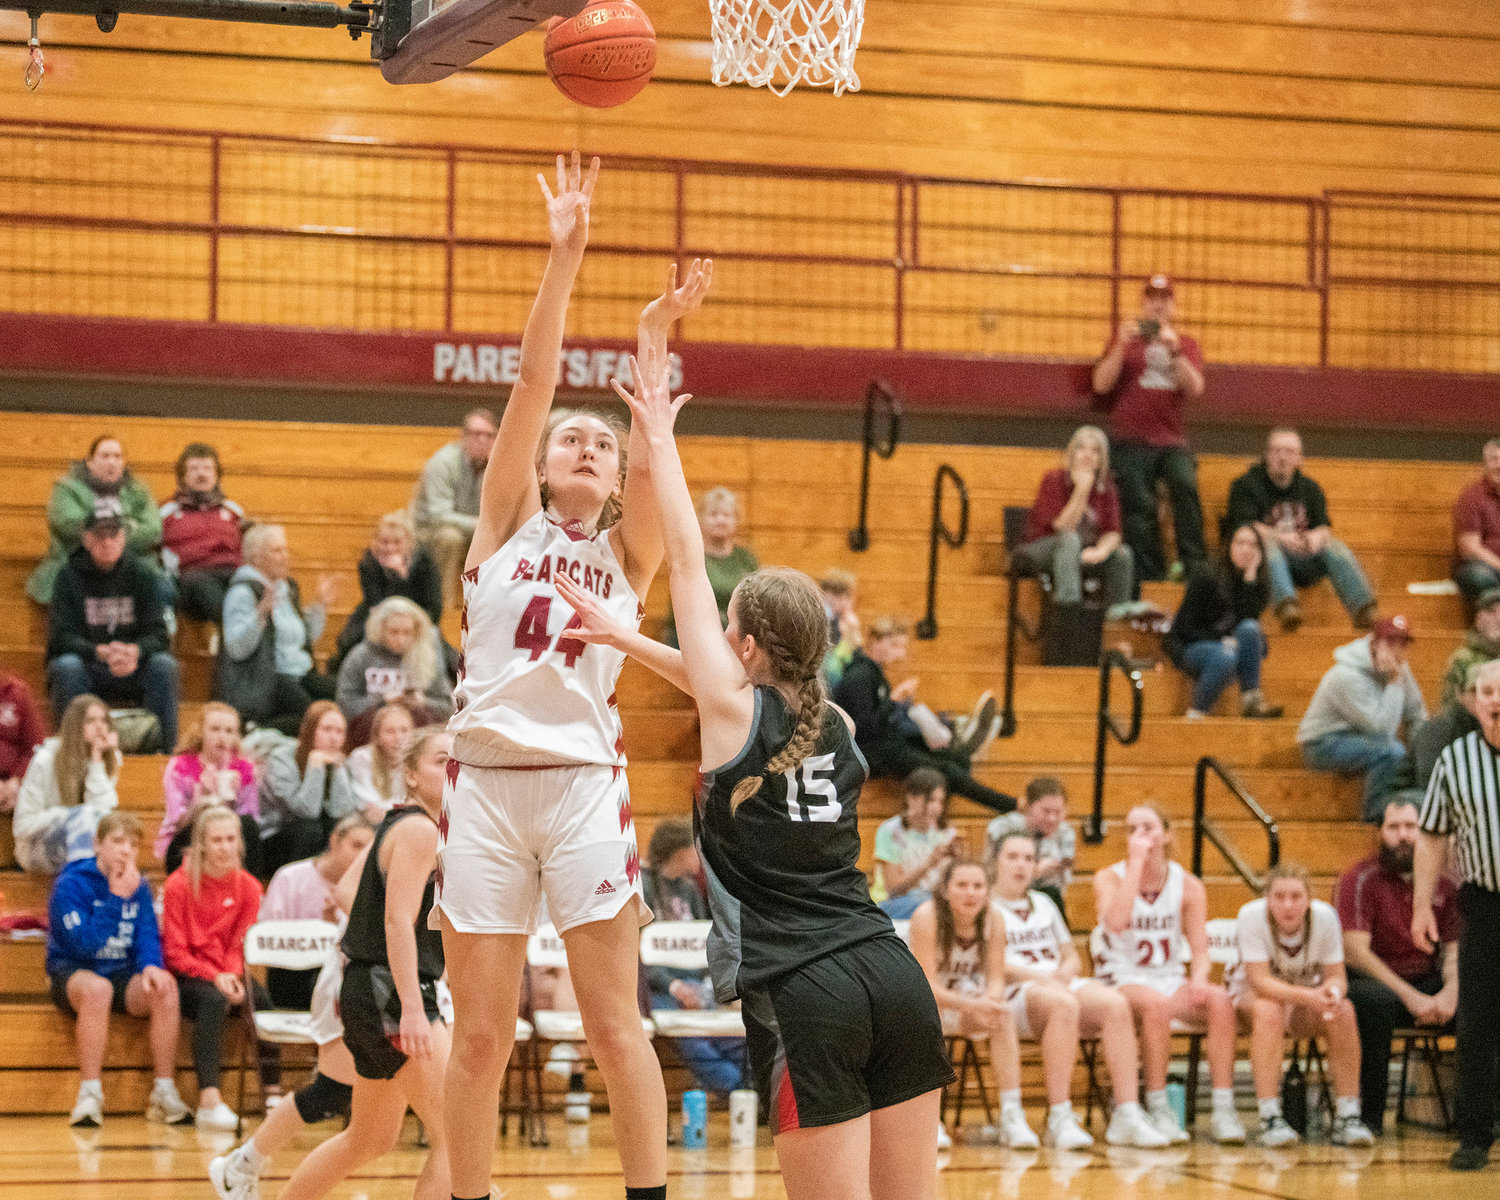 Bearcat sophomore Julia Dalan (44) puts up a shot during a game against R.A. Long Tuesday night in Chehalis.